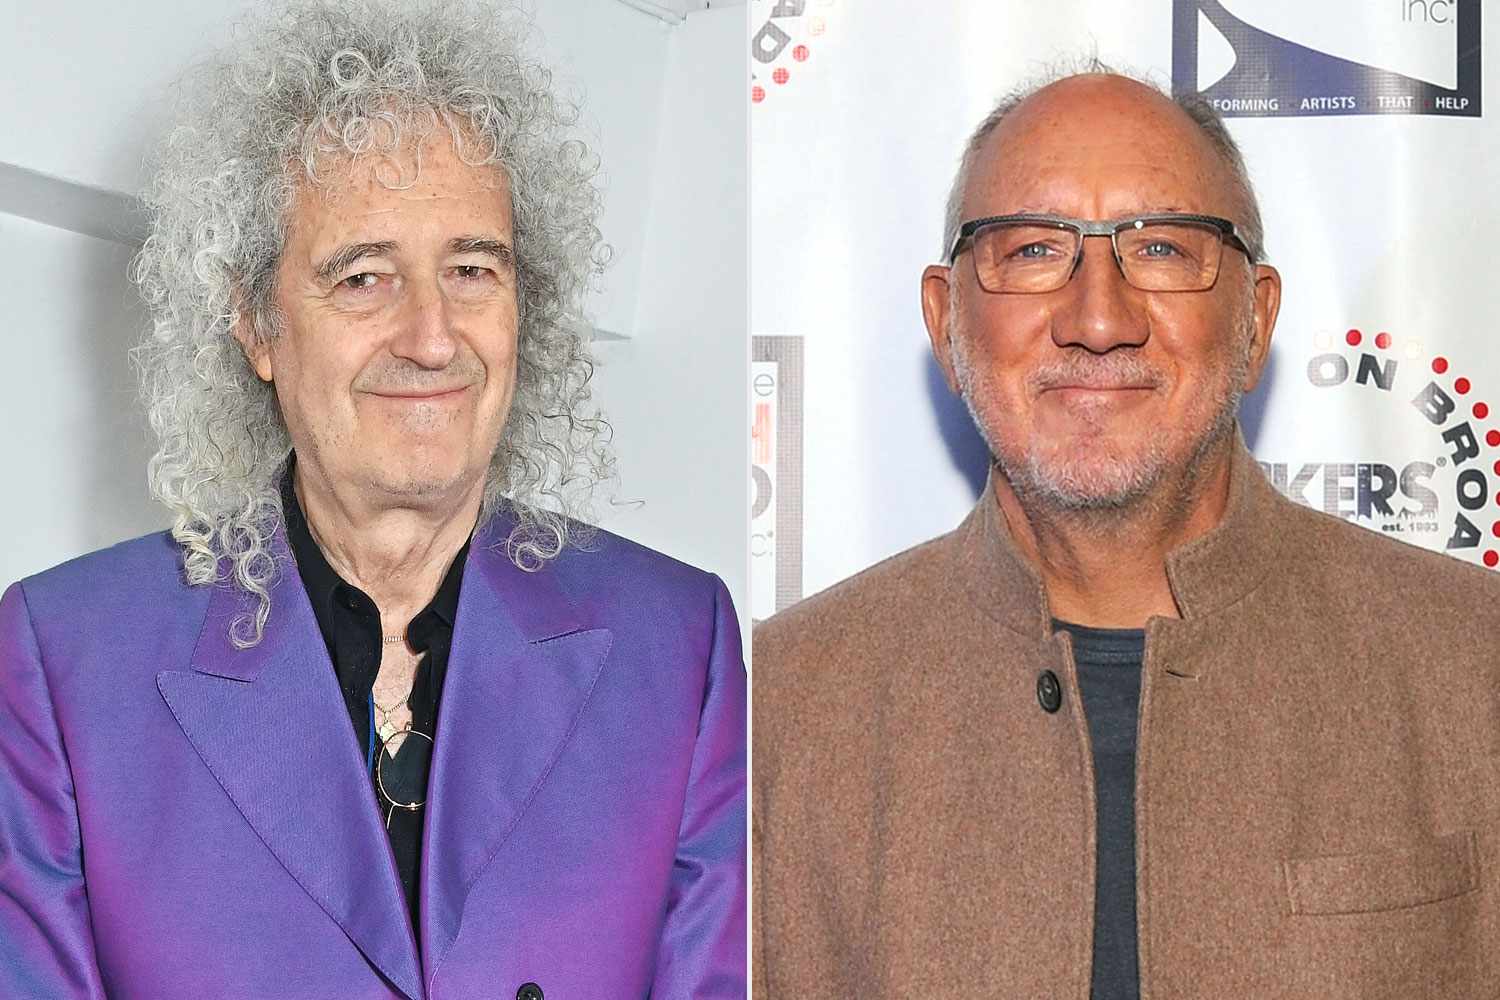 Queen's Brian May Says The Who's Pete Townshend 'Basically Invented' Rock Guitar: 'My Playing...